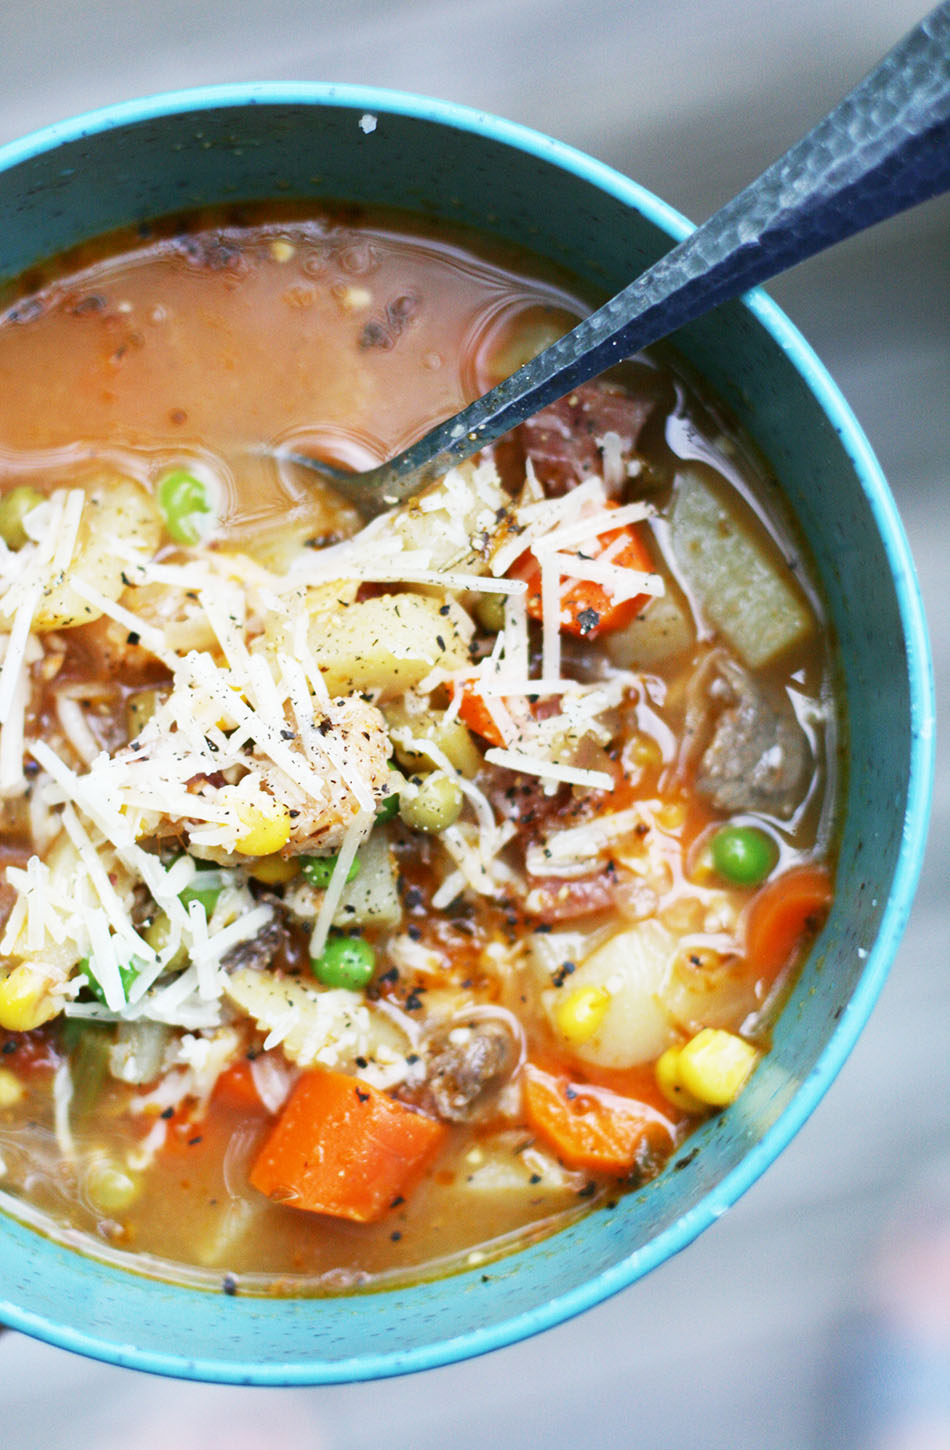 Booyah soup recipe: Click through to get full recipe. A thick, hearty soup recipe popular in the Upper Midwest.